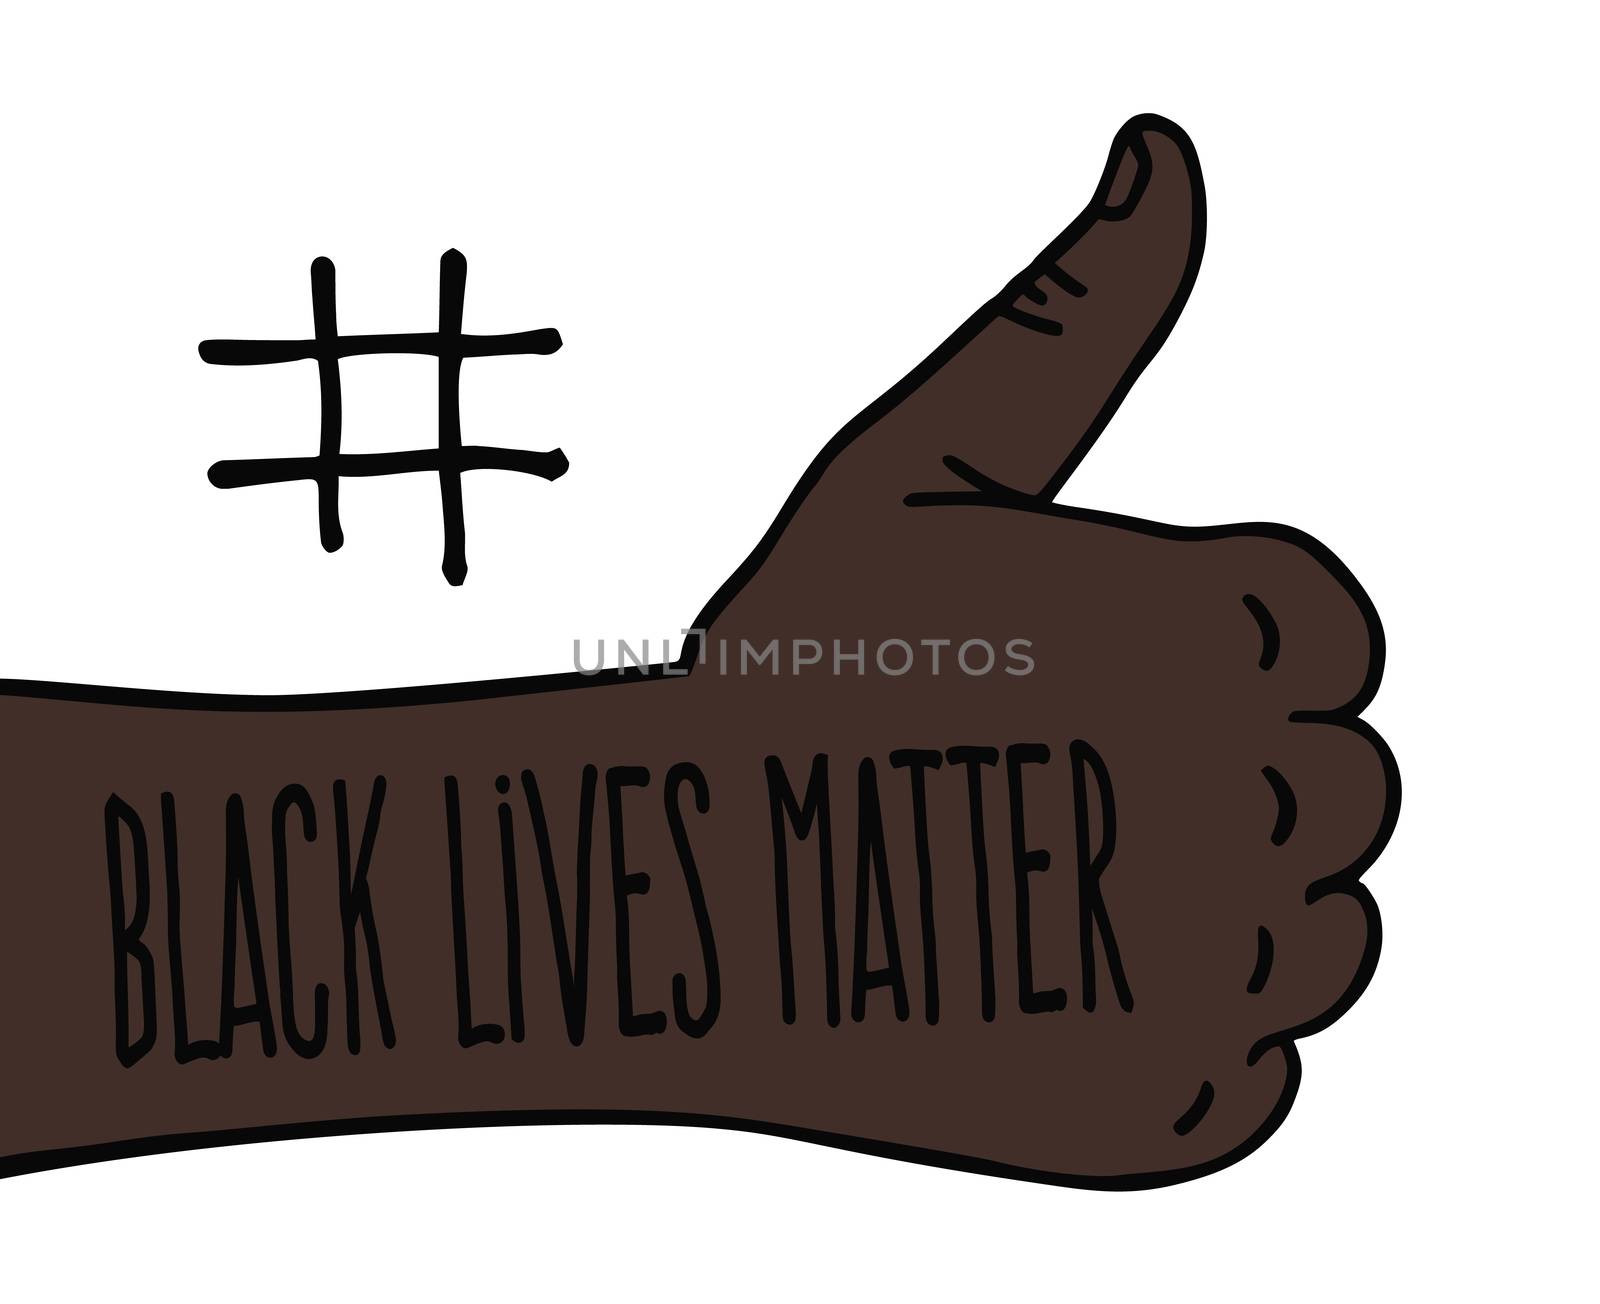 Thumbs up Black Lives Matter. Protest Banner about Human Right of Black People in U.S. America. Vector Illustration.